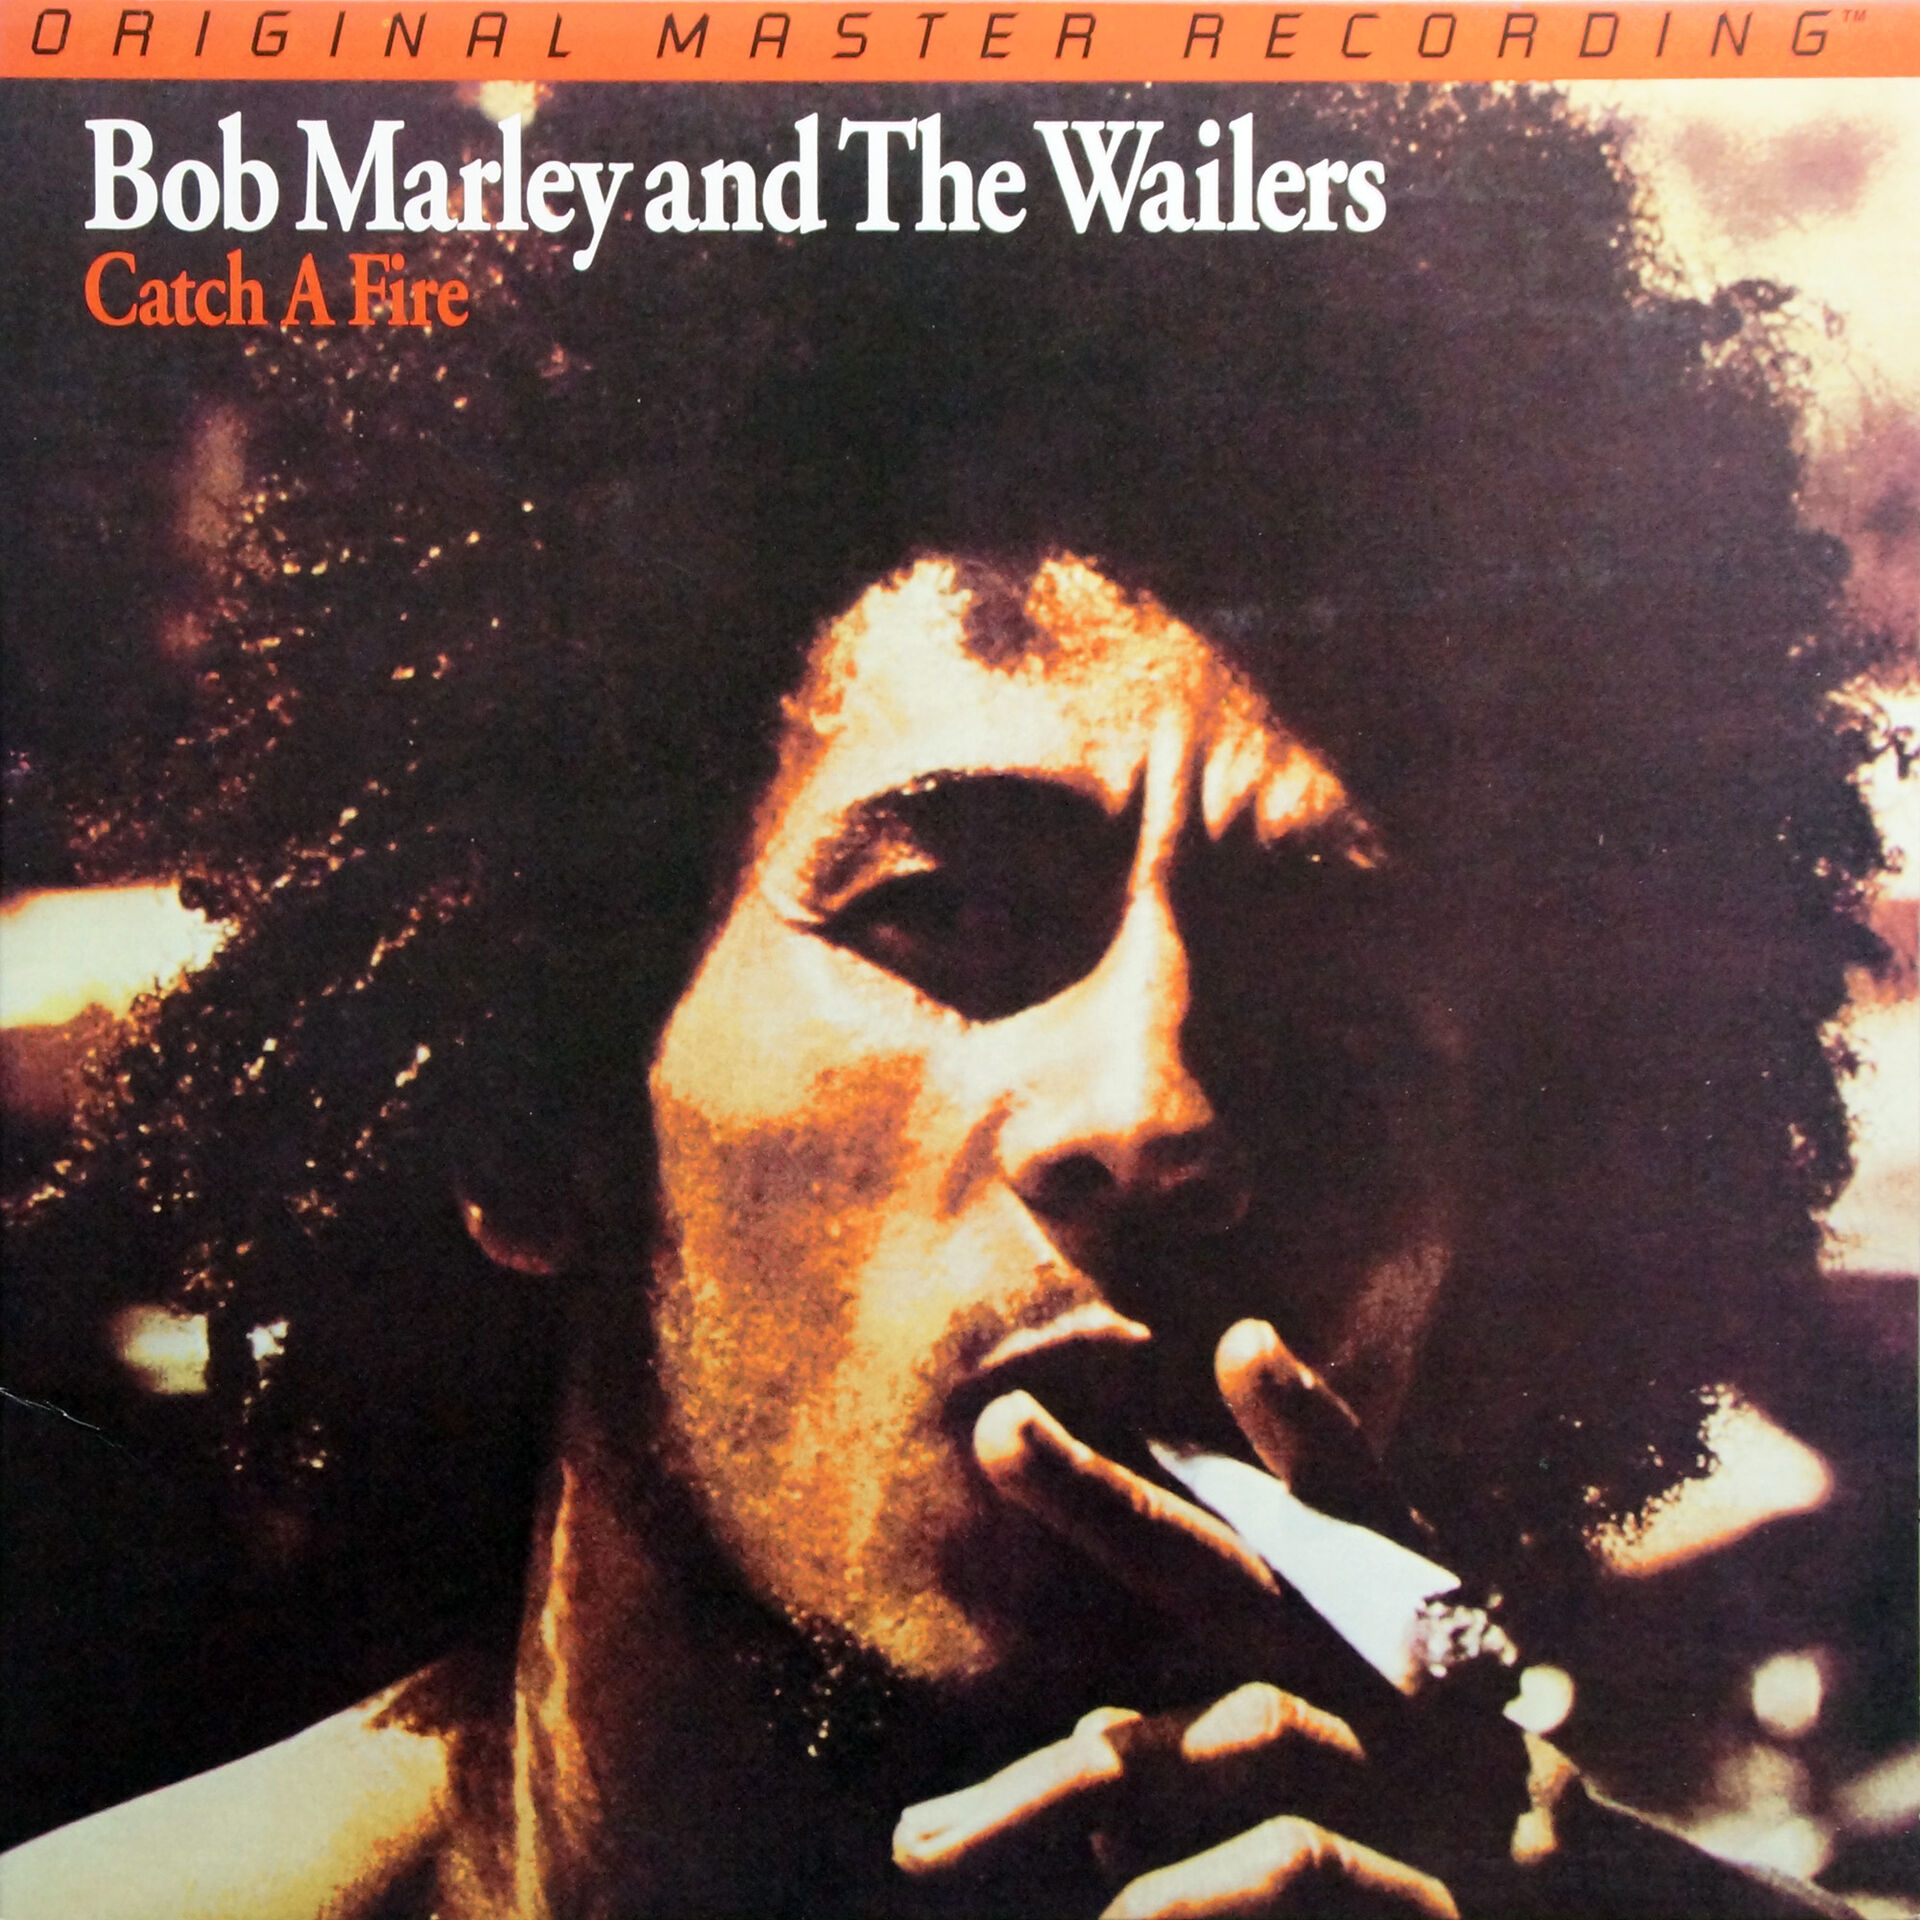 Bob Marley & The Wailers - Catch A Fire (front).jpg